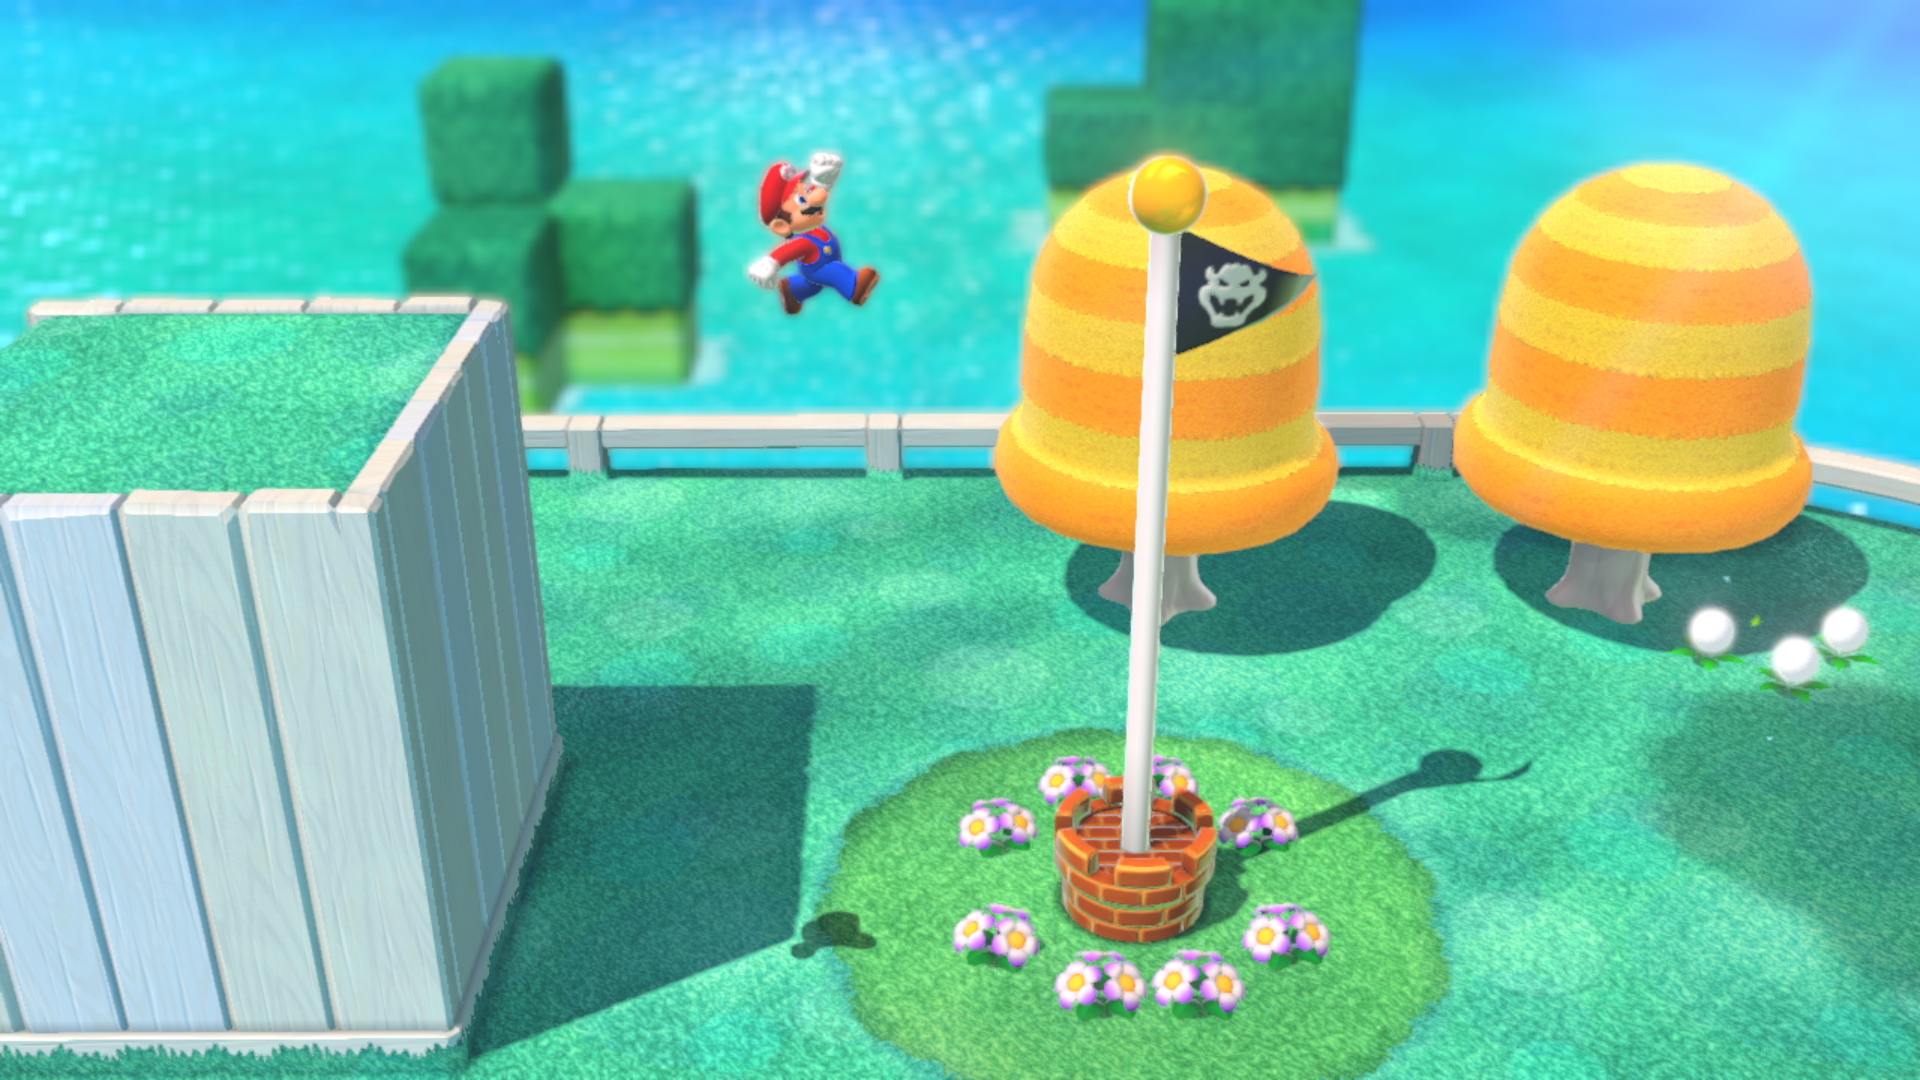 A screenshot from Super Mario 3D World + Bowser's Fury on Nintendo Switch